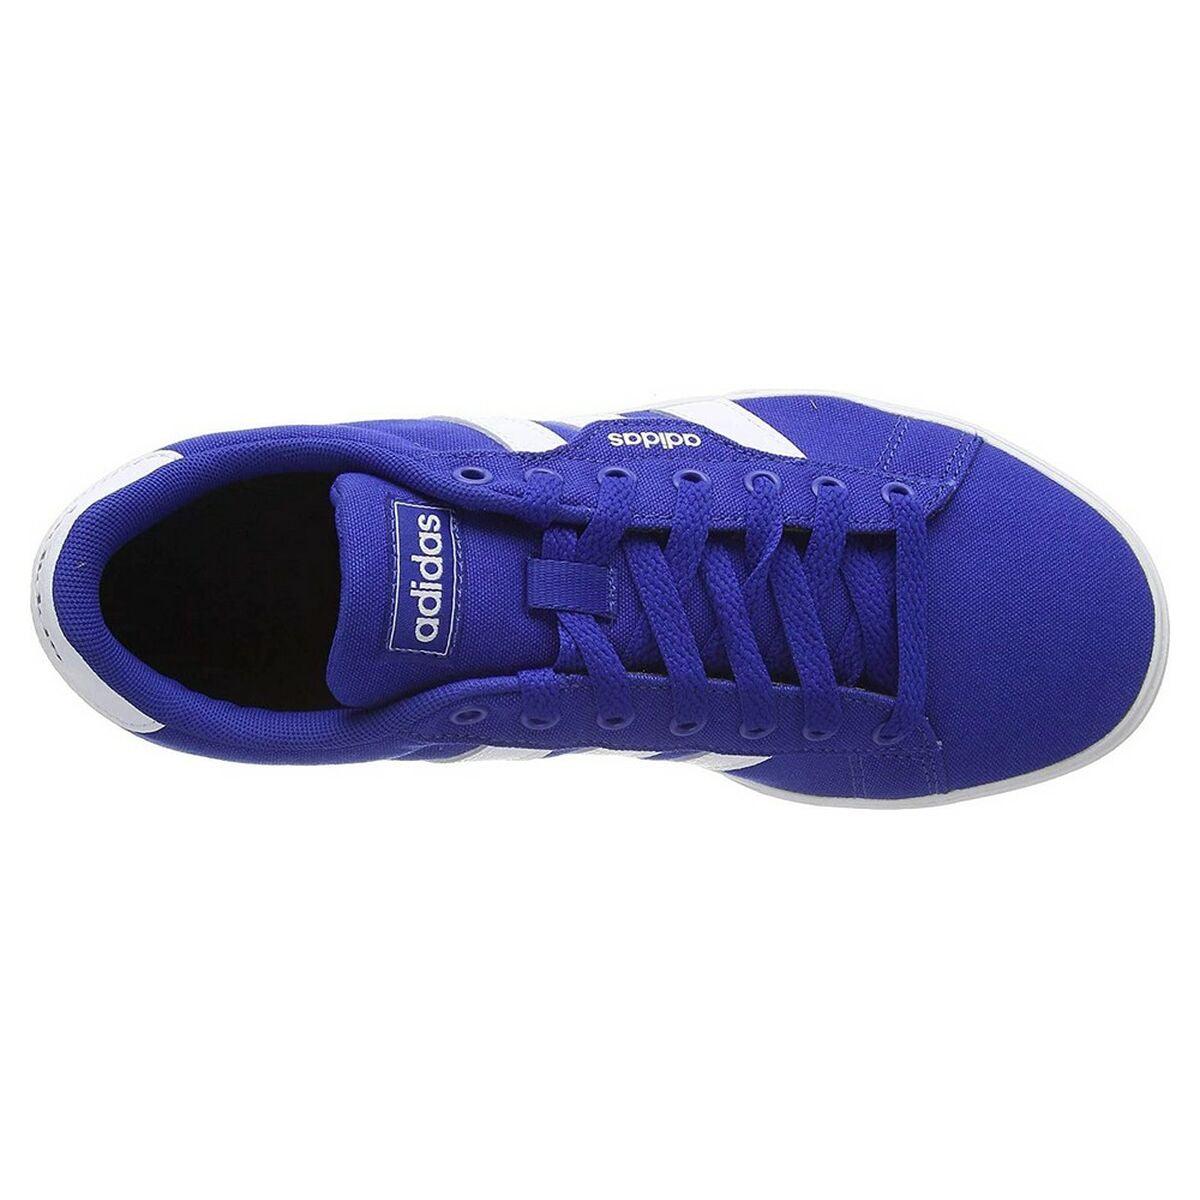 Sports Shoes for Kids Adidas Daily 3.0 Unisex Royal - Sterilamo